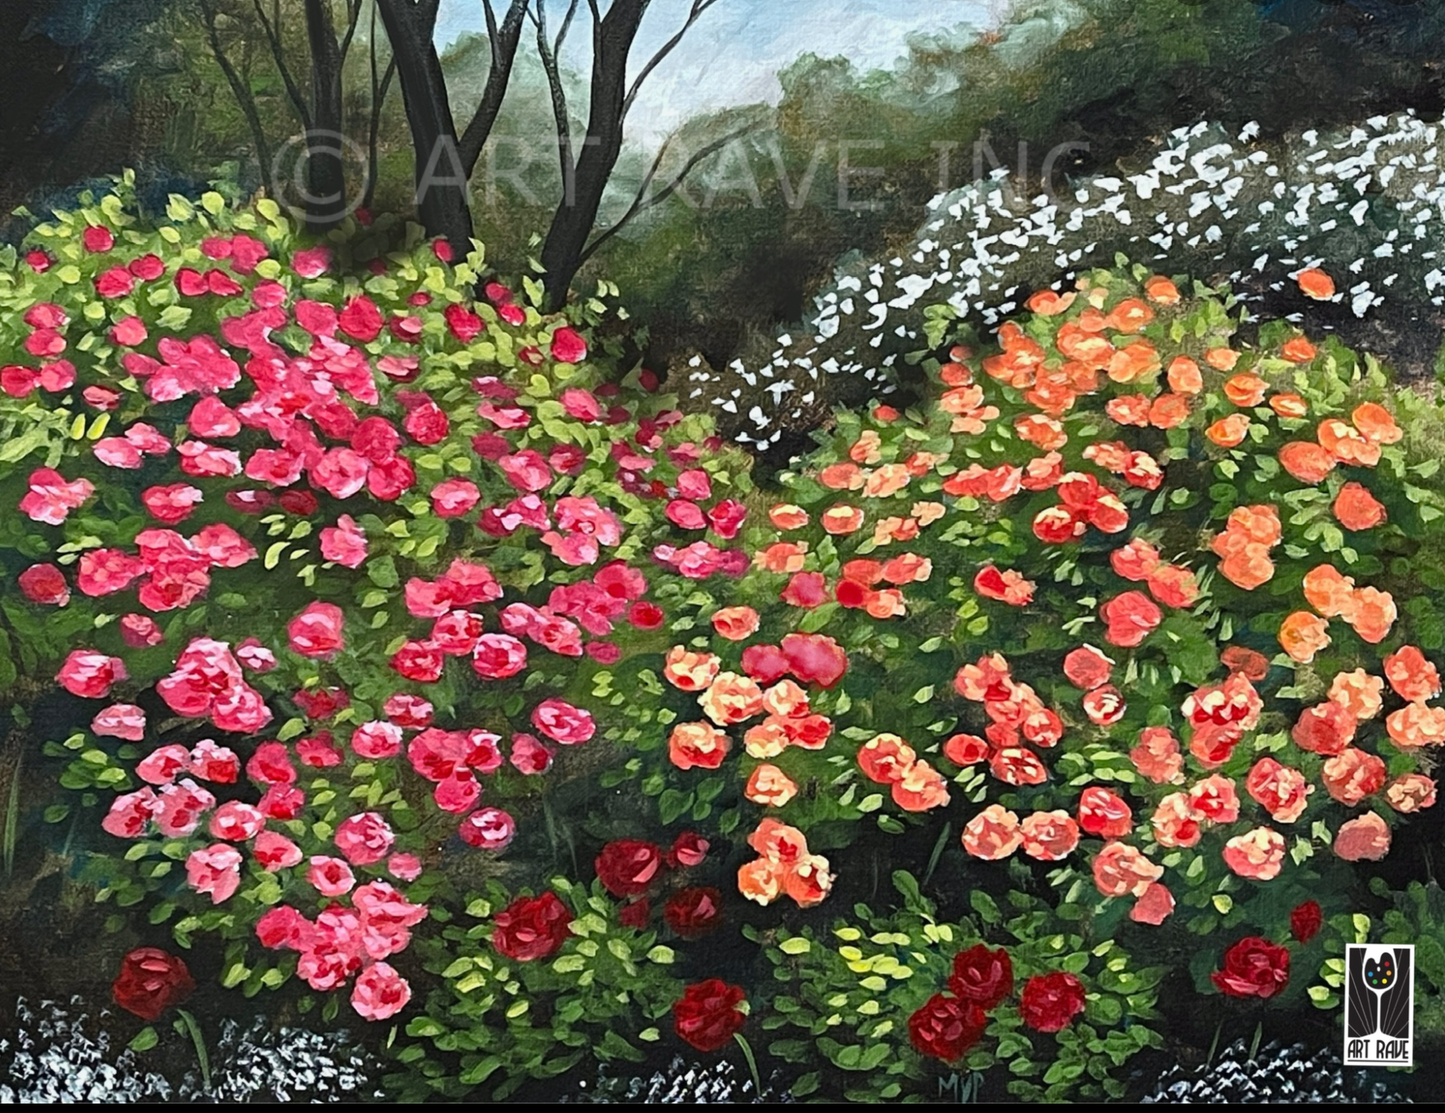 Acrylic Painting with Christy - June 29